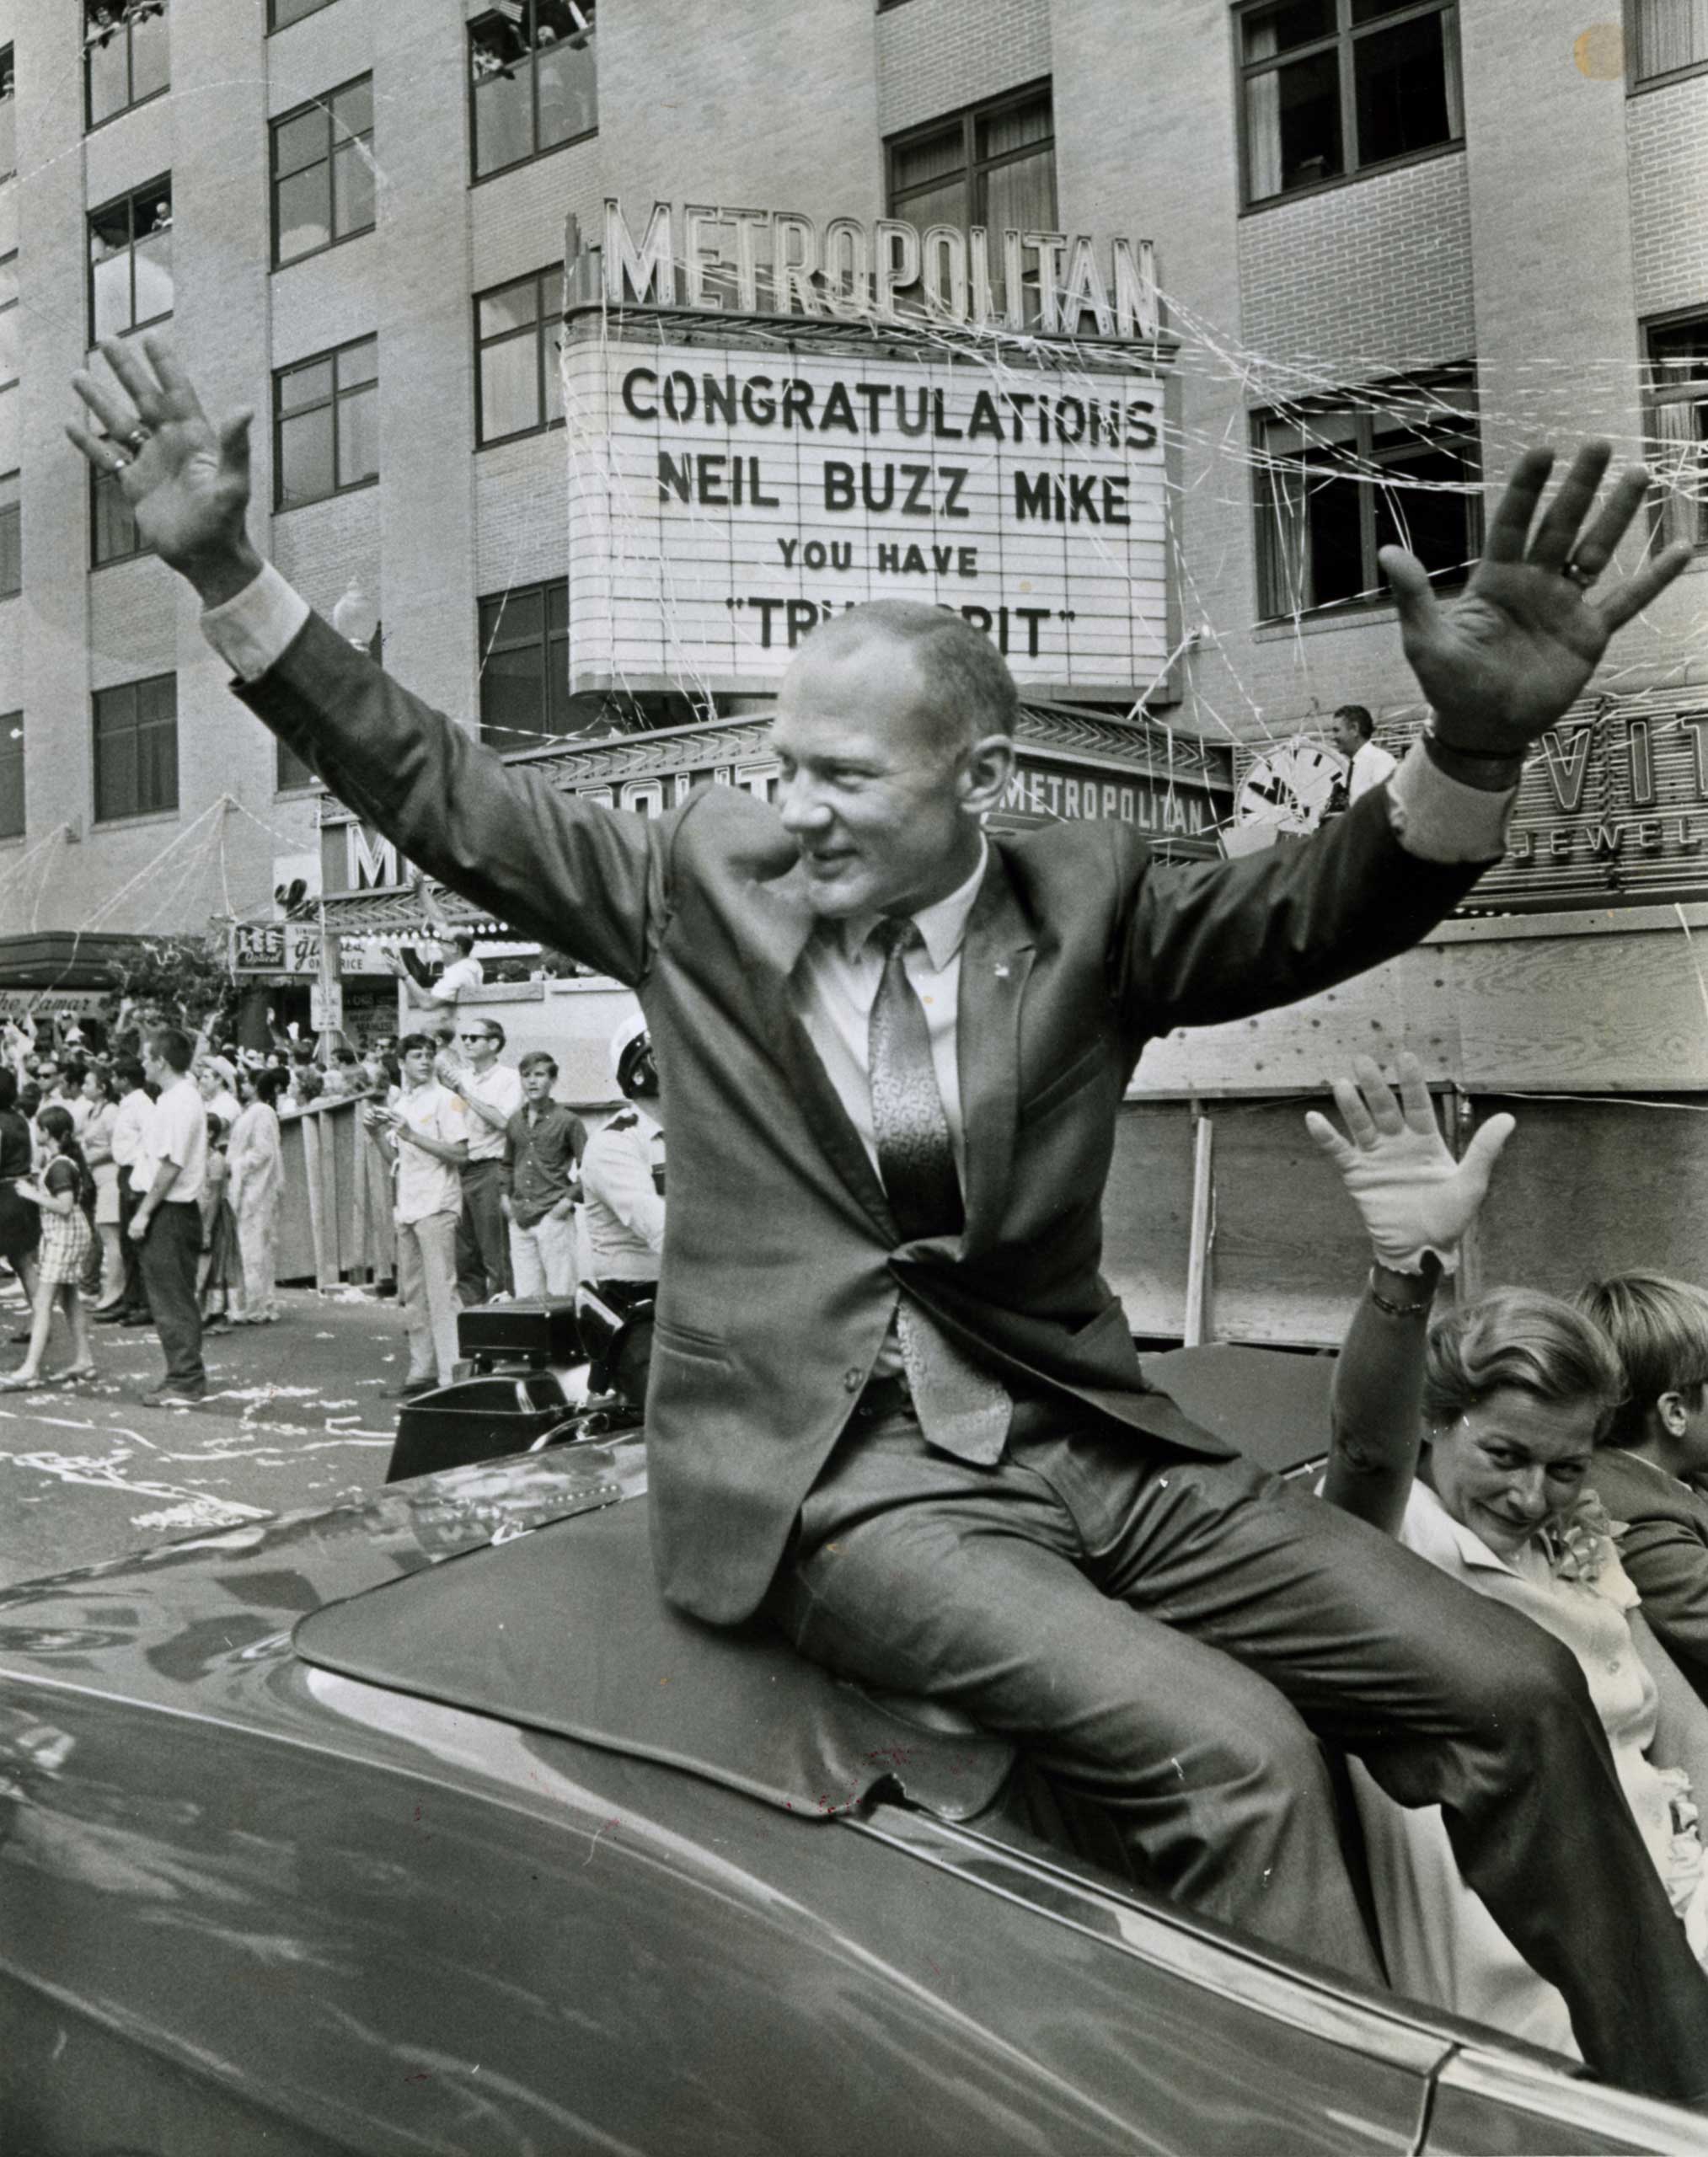 Aldrin and his Apollo 11 crew-mates were greeted with a hero's welcome and rode in parades in their honor in New York, Chicago and Los Angeles.